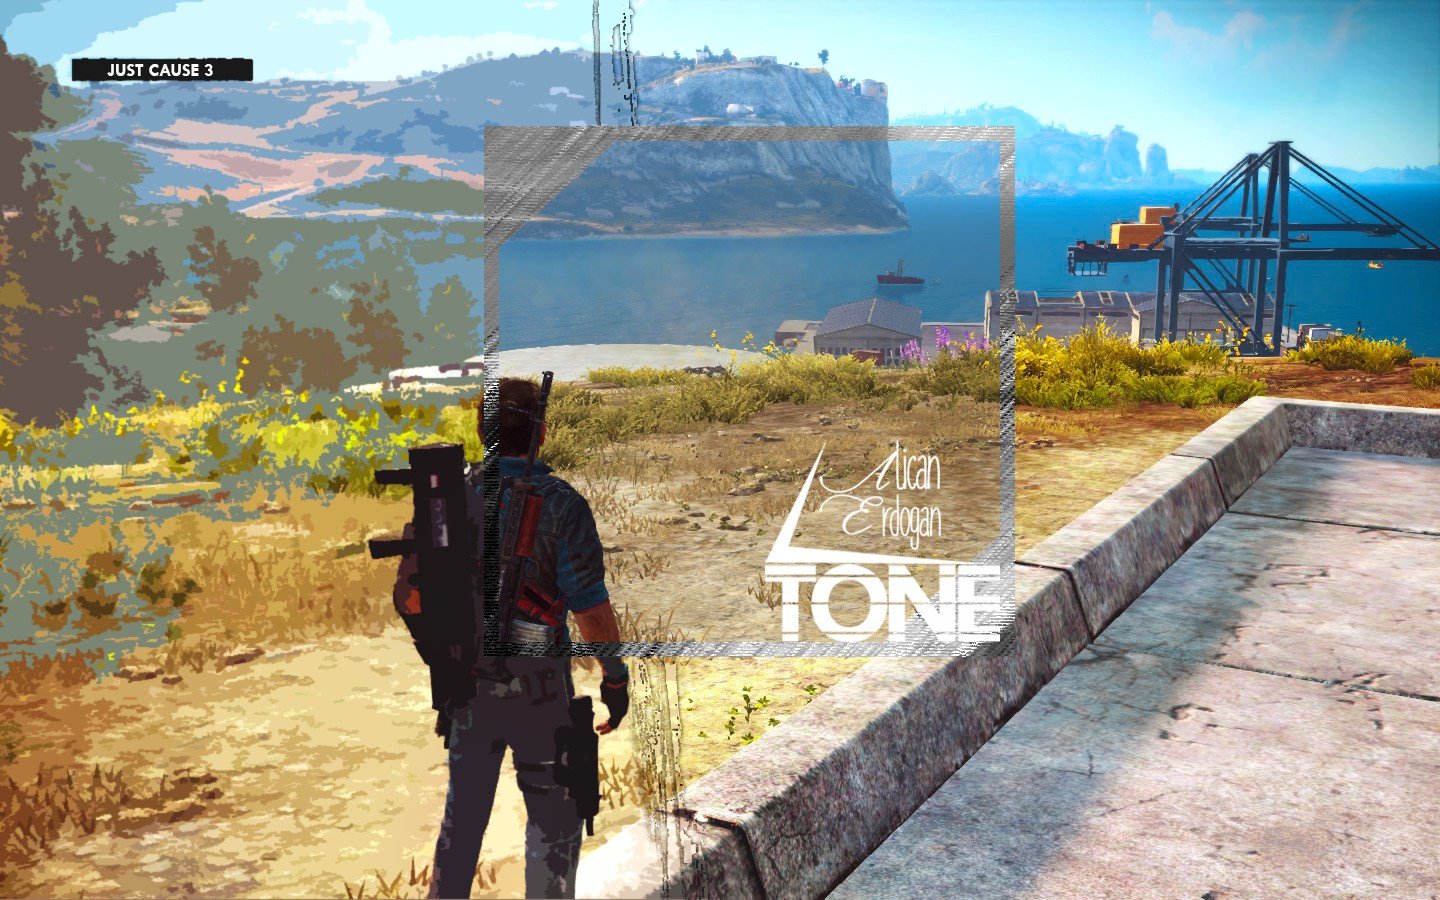 Just Cause 3, Just Cause, Just play, Screen shot Wallpaper